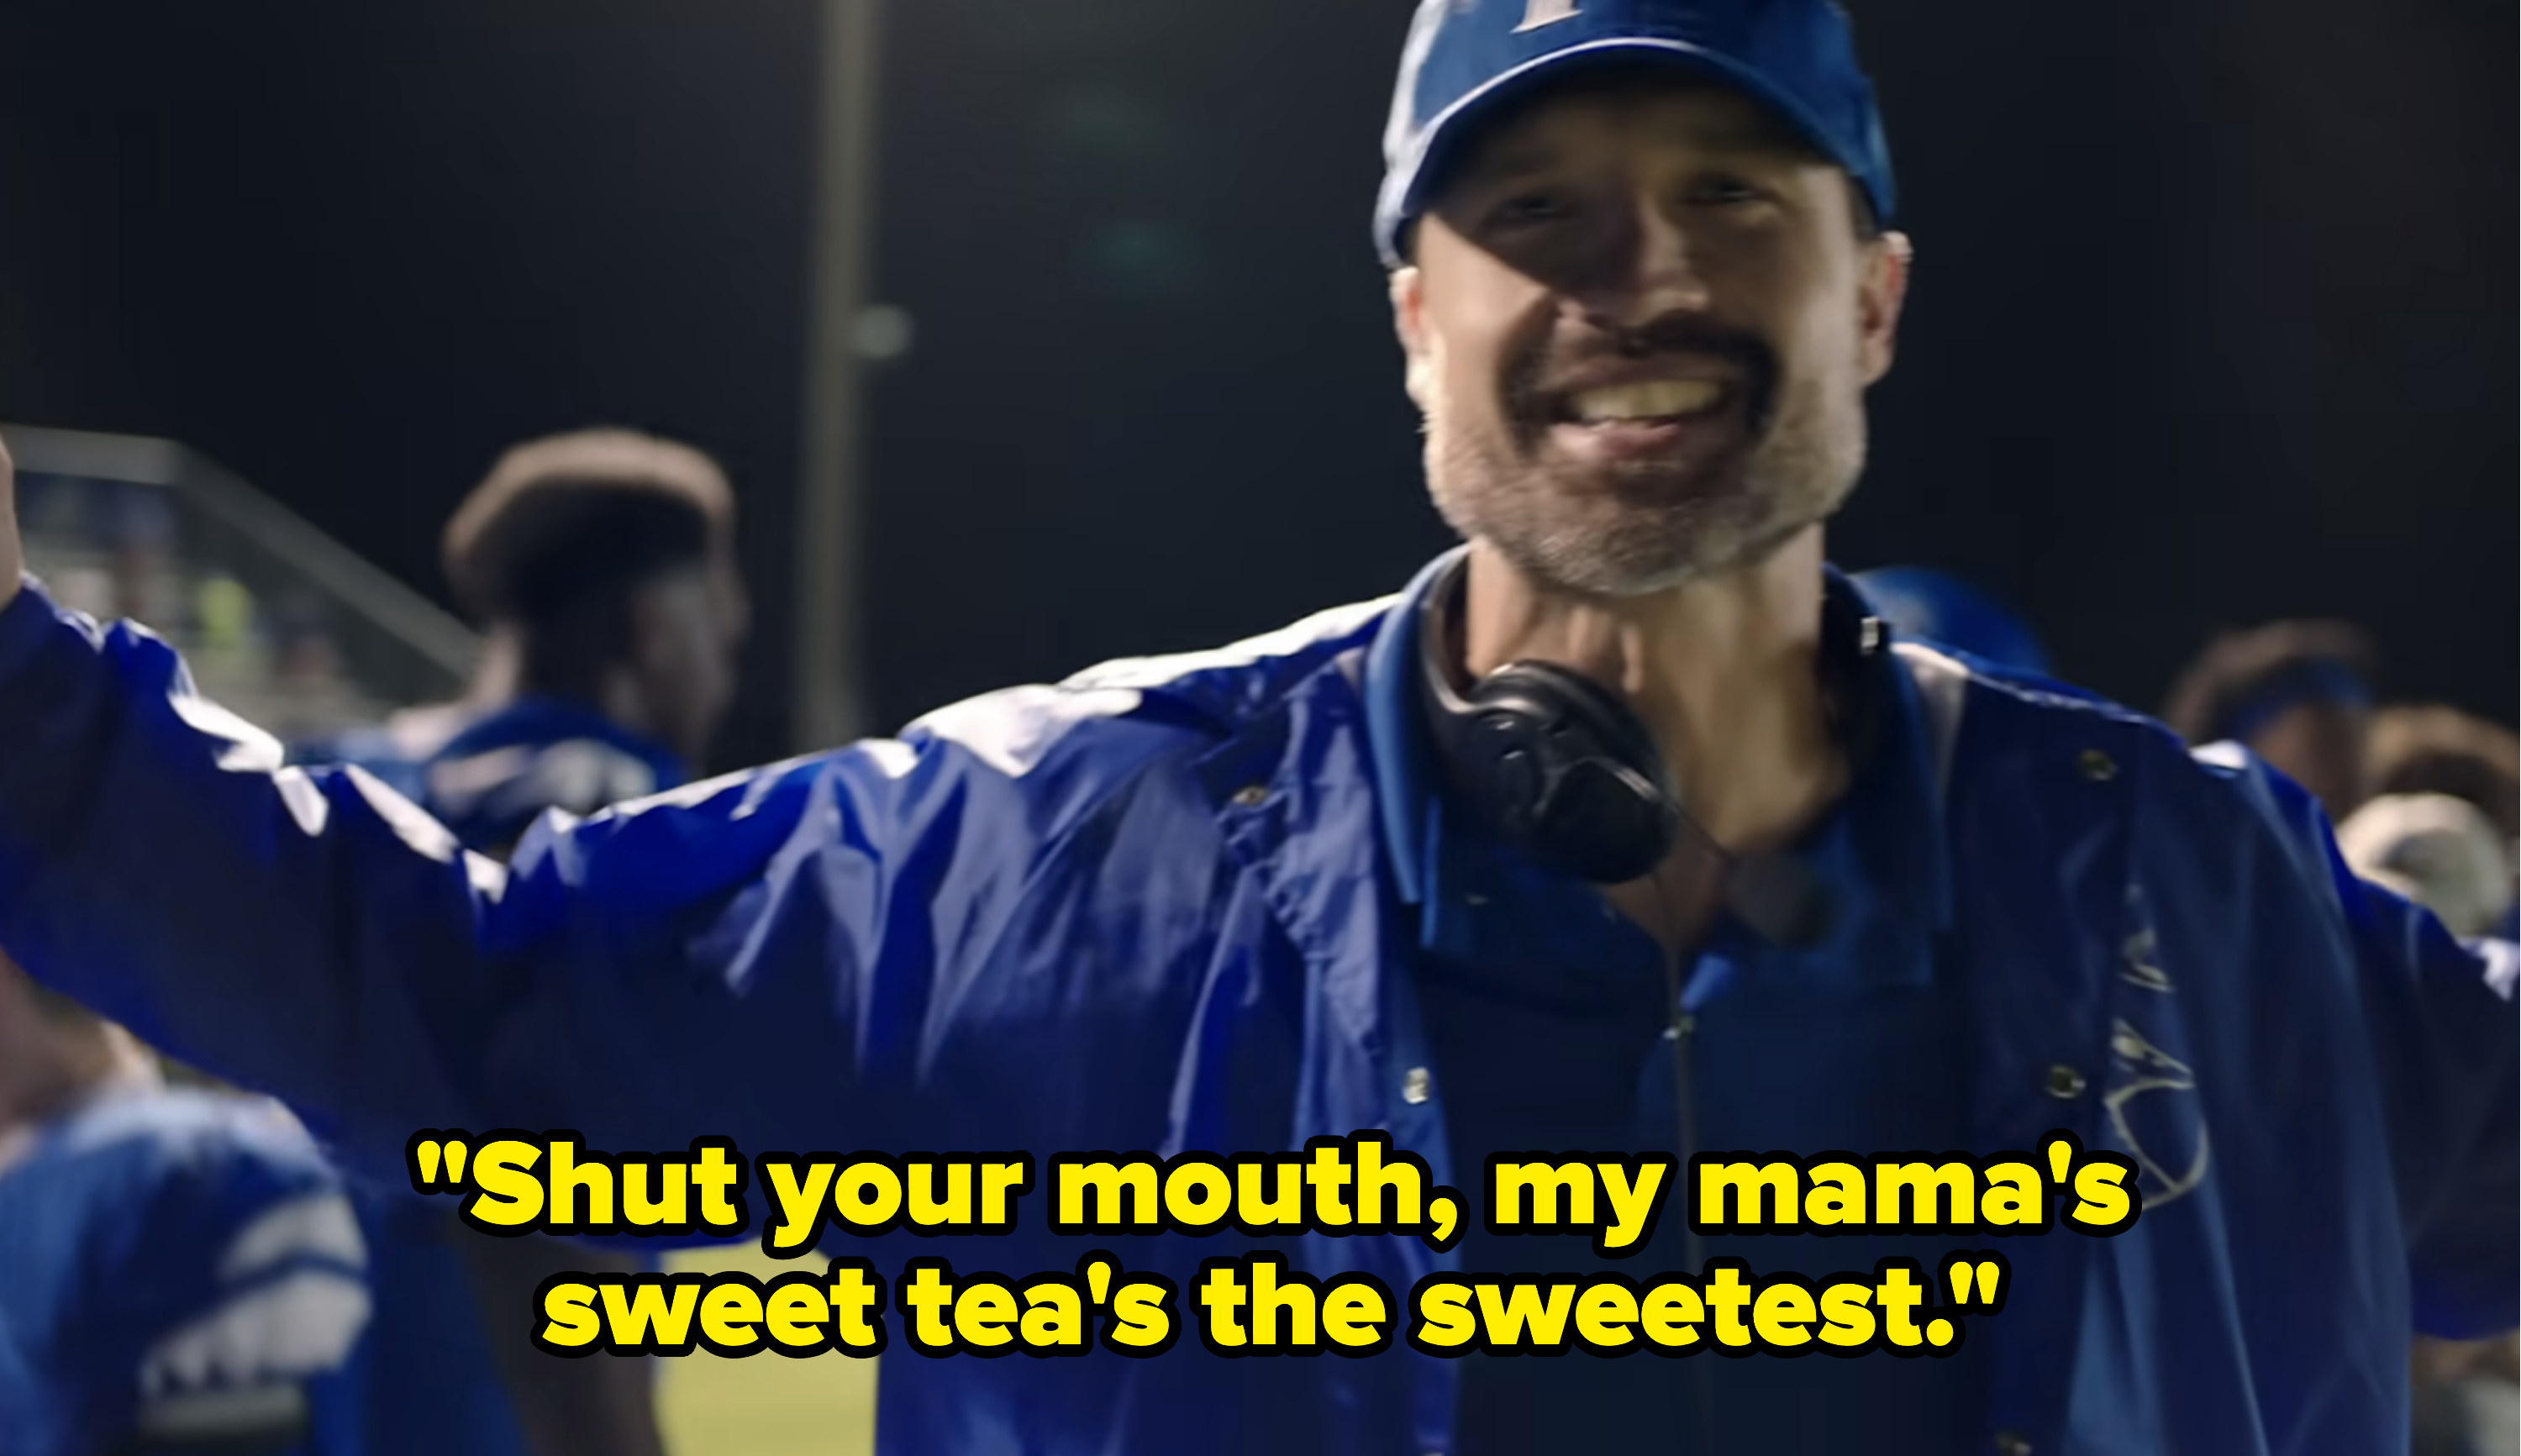 &quot;Shut your mouth, my mama&#x27;s sweet tea&#x27;s the sweetest.&quot;